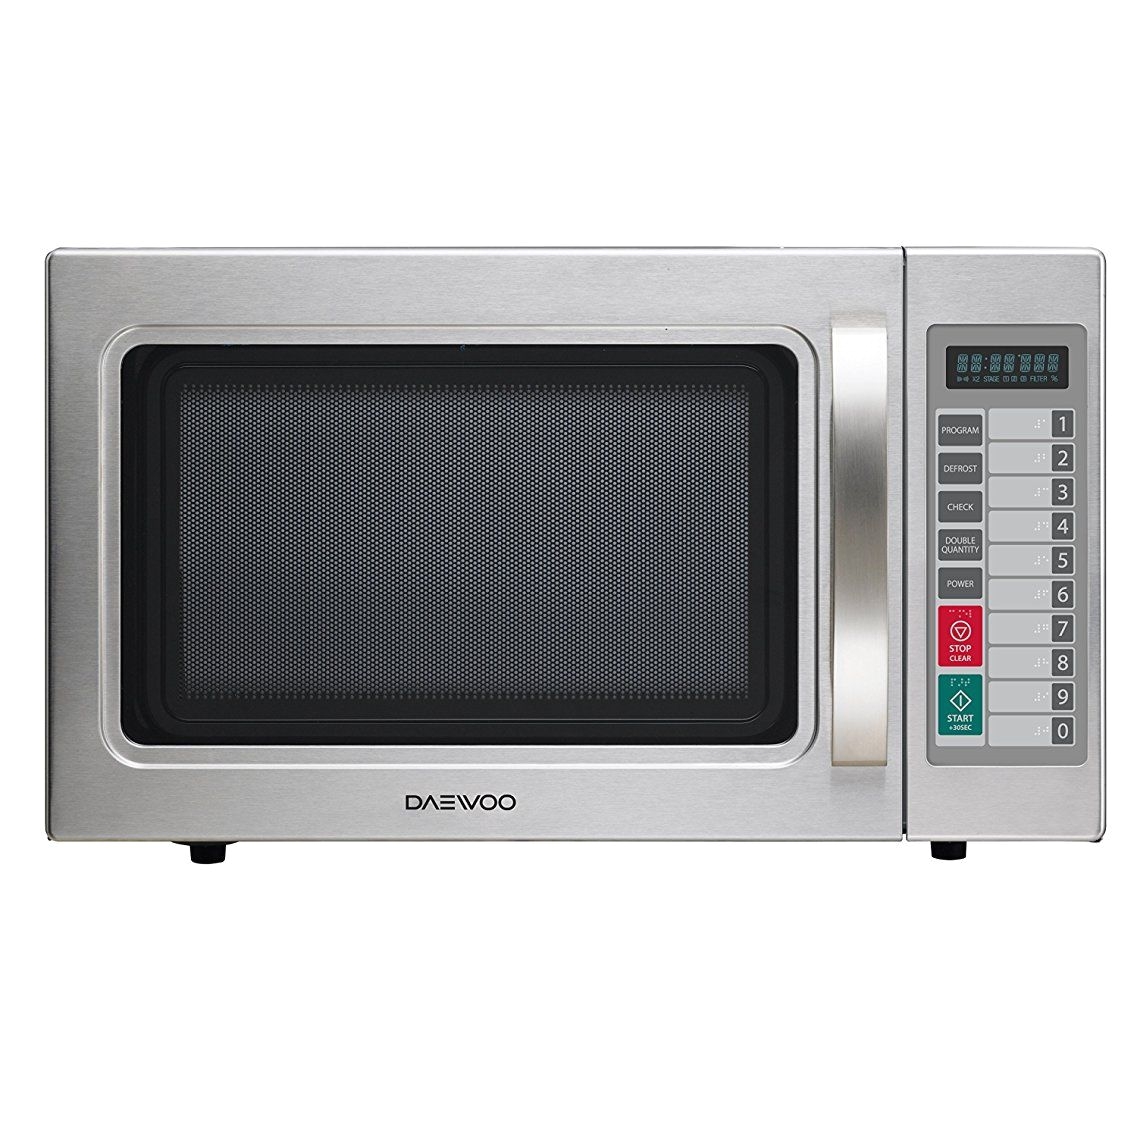 oven a evaluate daewoo stainless steel